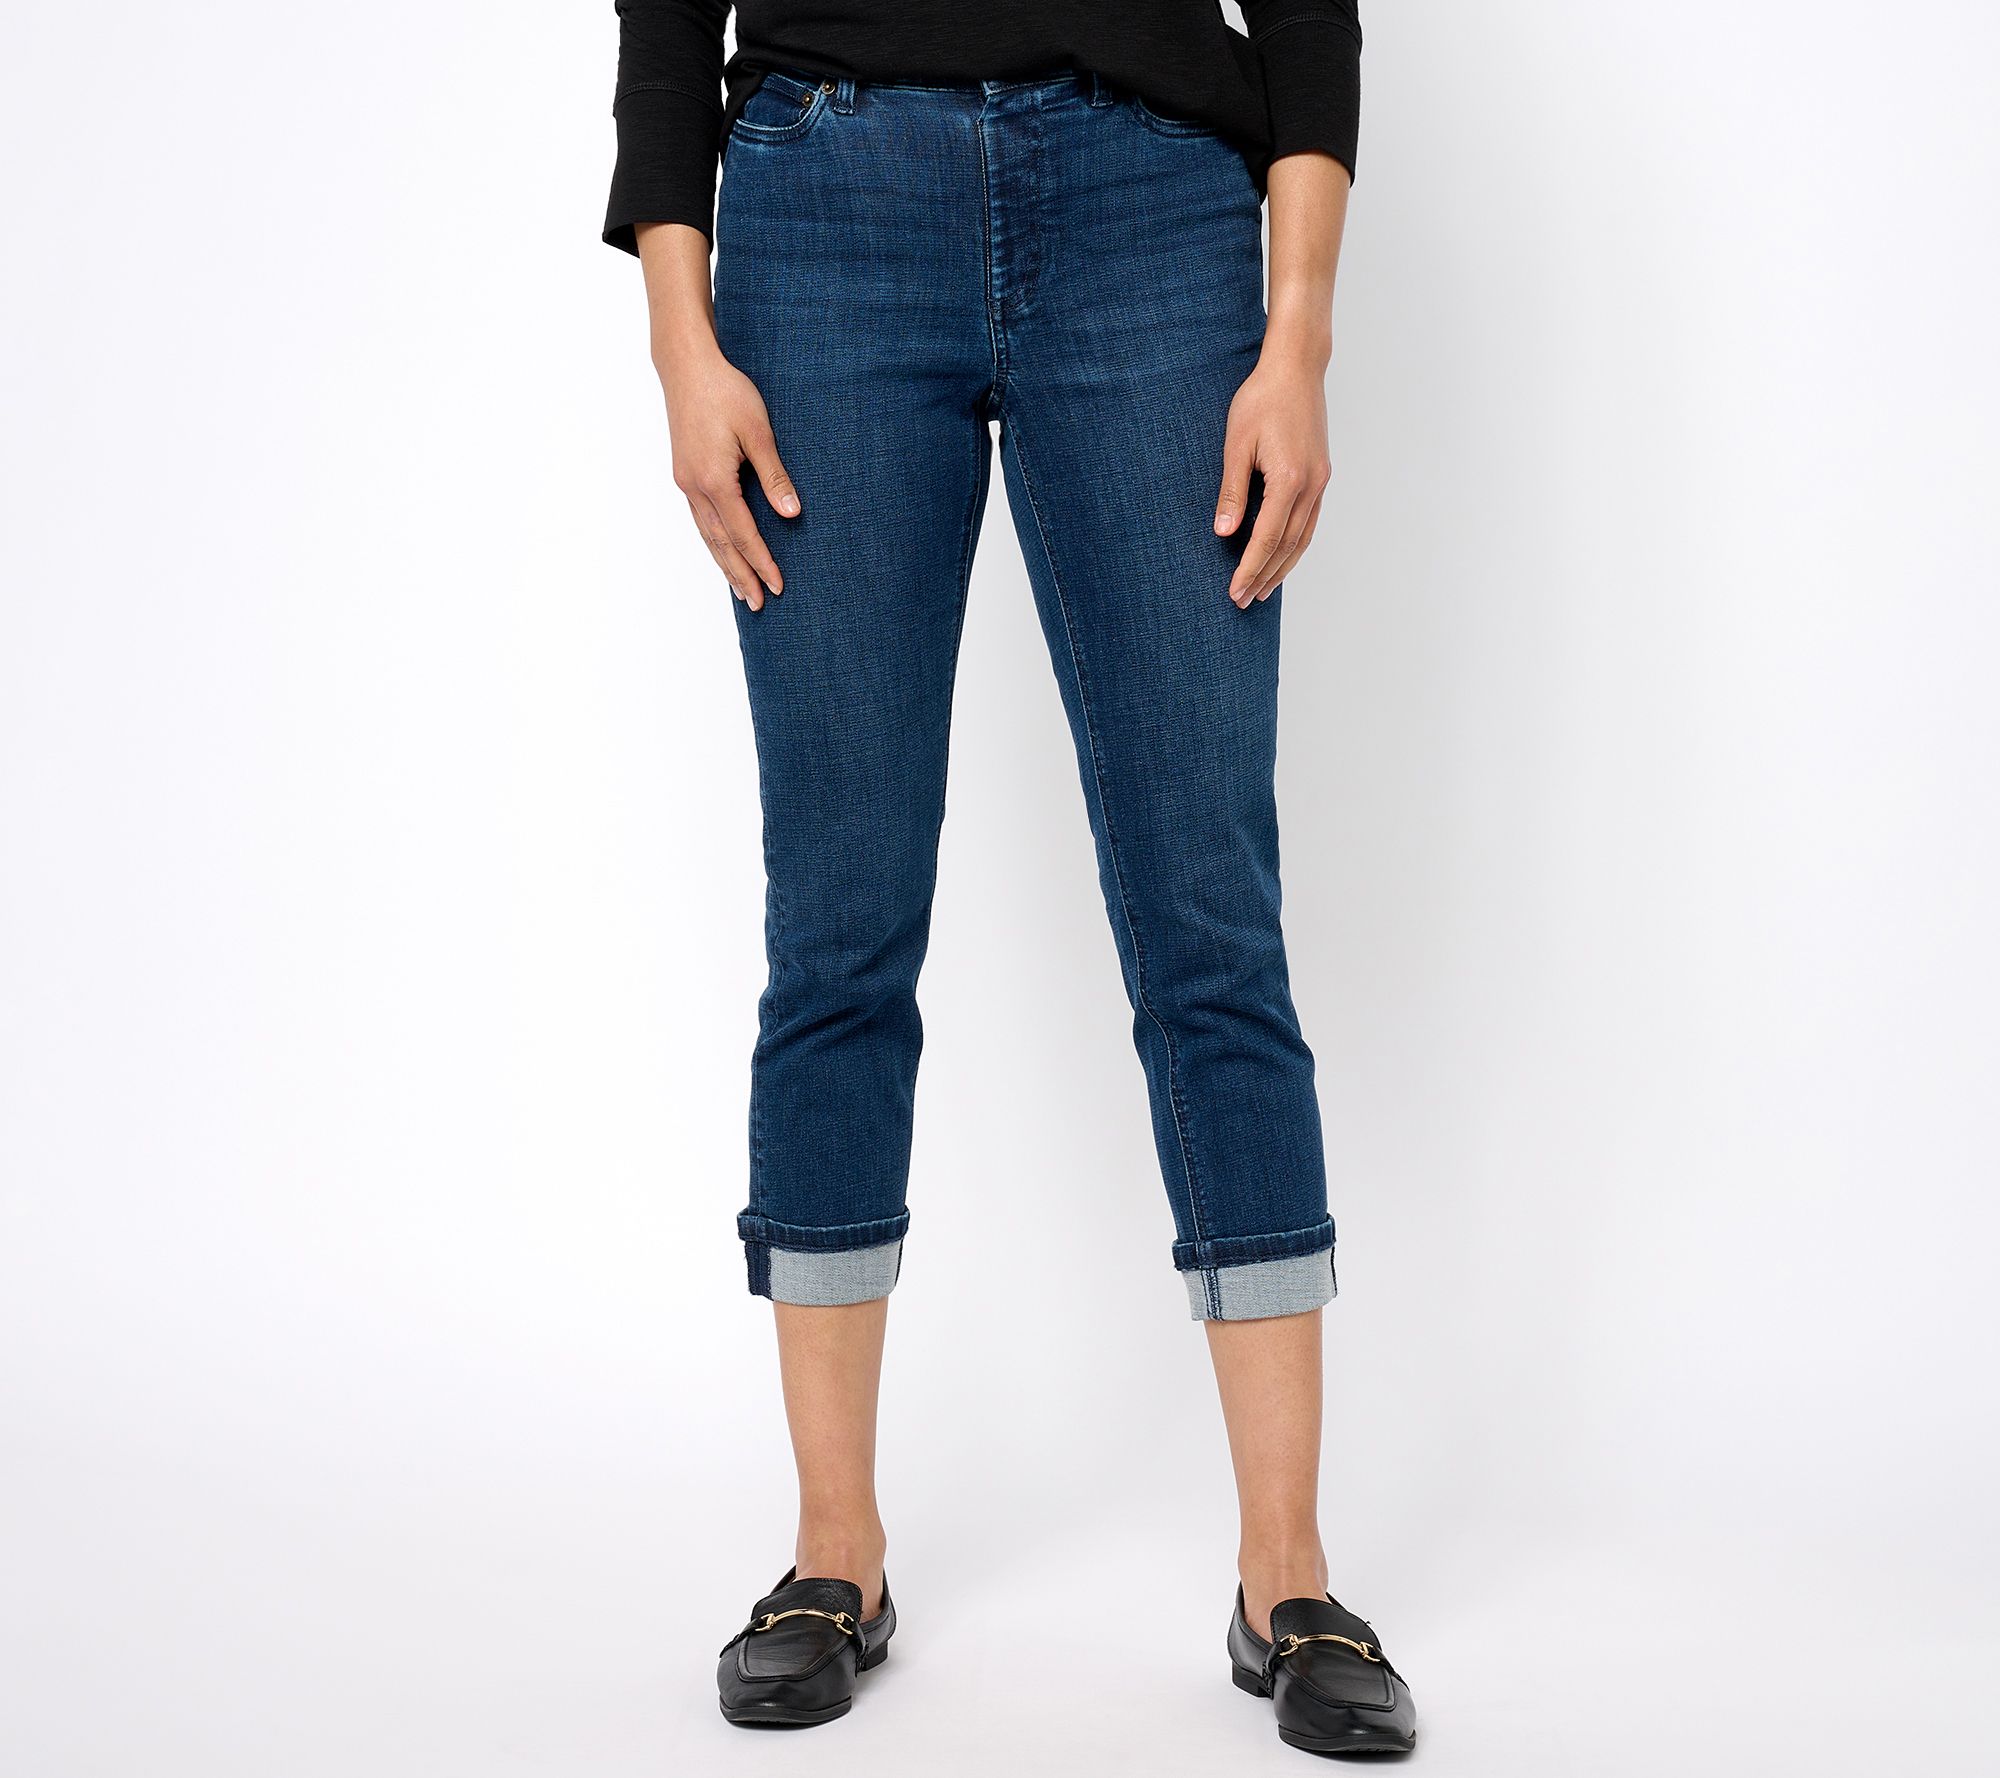 Denim & Co. Comfy Knit Air Petite Straight Crop Pant with Side